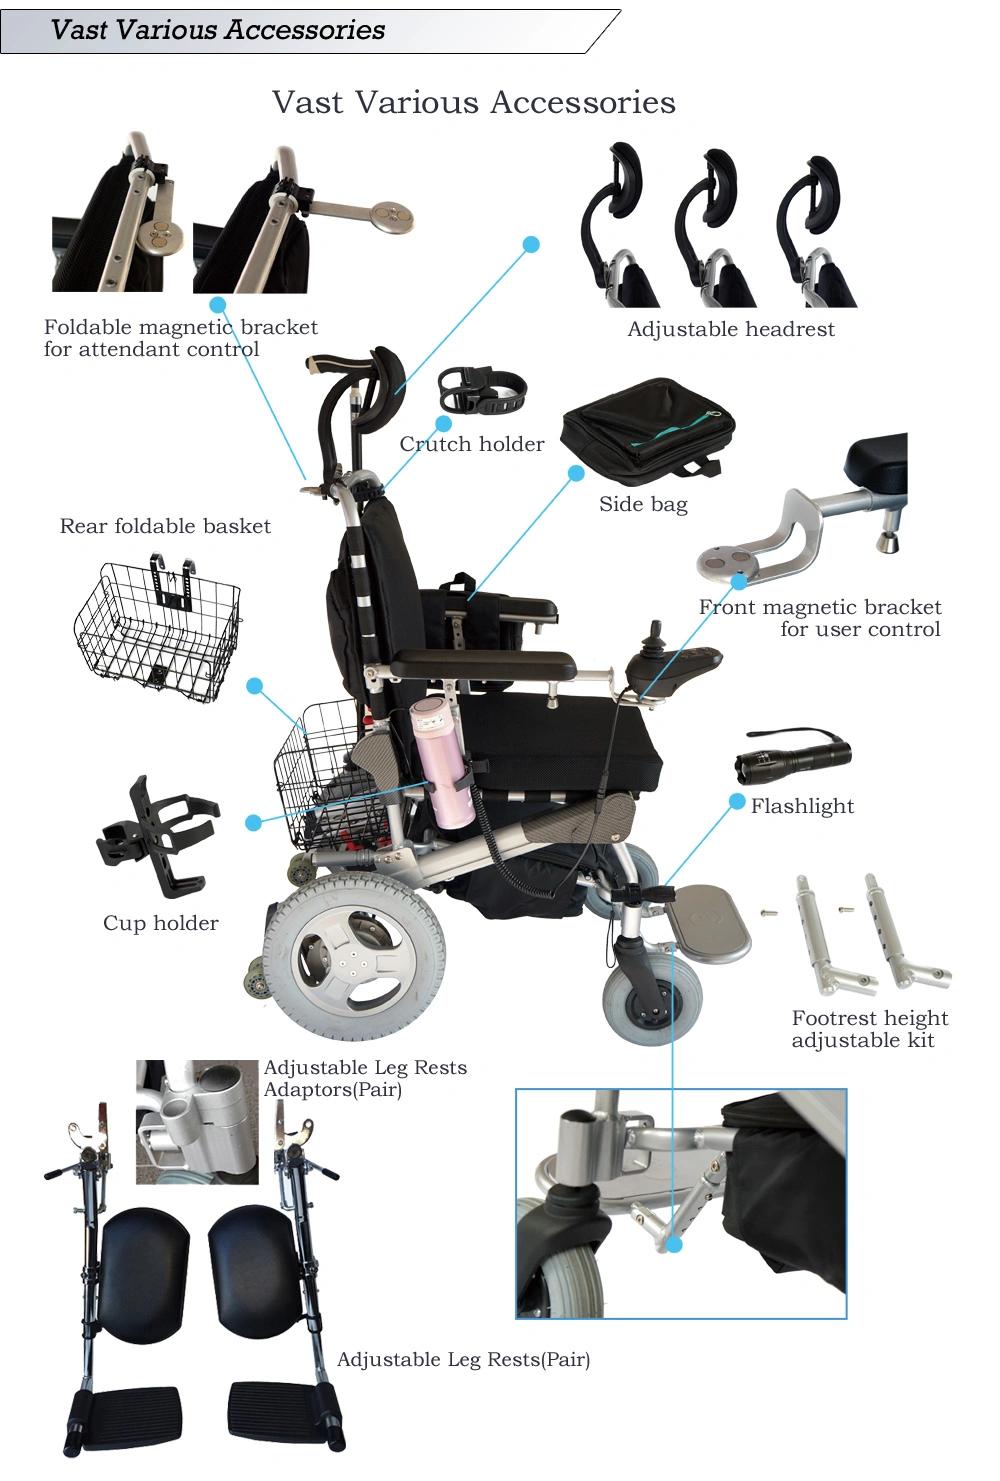 New Version! 1 Second Folding! Power Electric Wheelchair Approved, The Best in The World